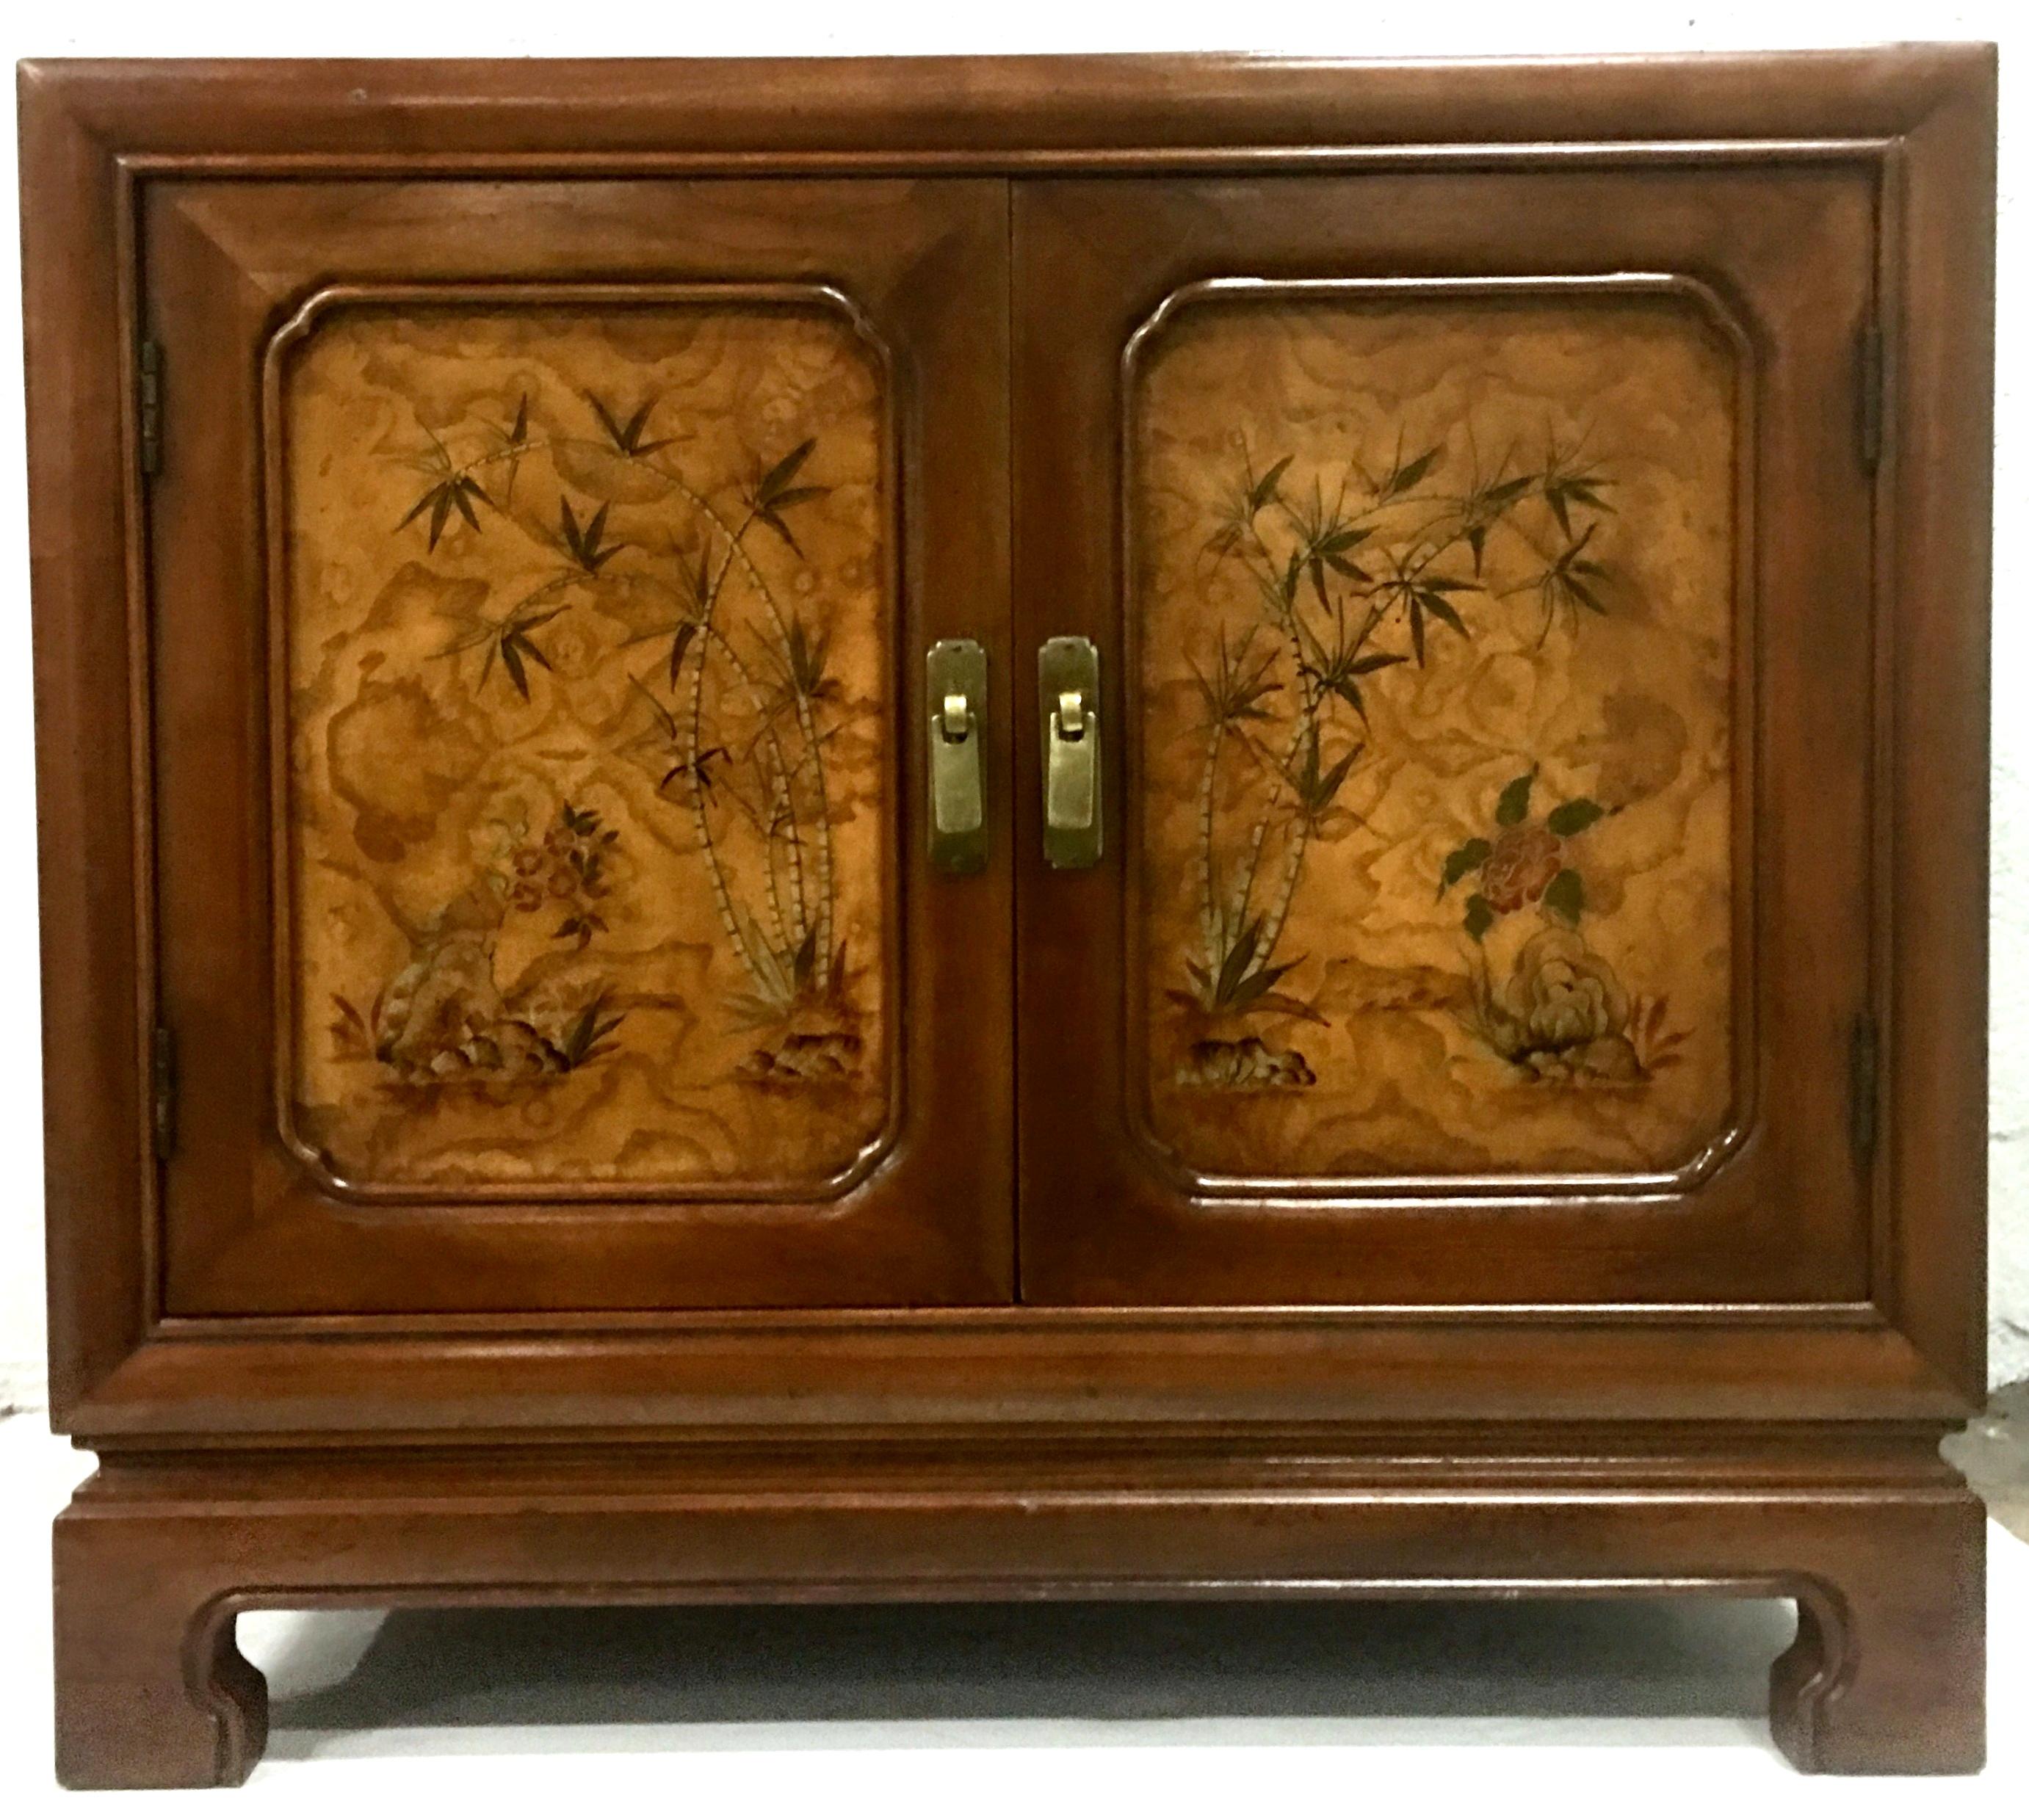 20th century pair of walnut and burl wood oriental style side tables or nightstands. Features exceptional quality walnut wood with front door panels of burl wood and hand painted Oriental motif. Original burnished solid brass pulls. Each piece